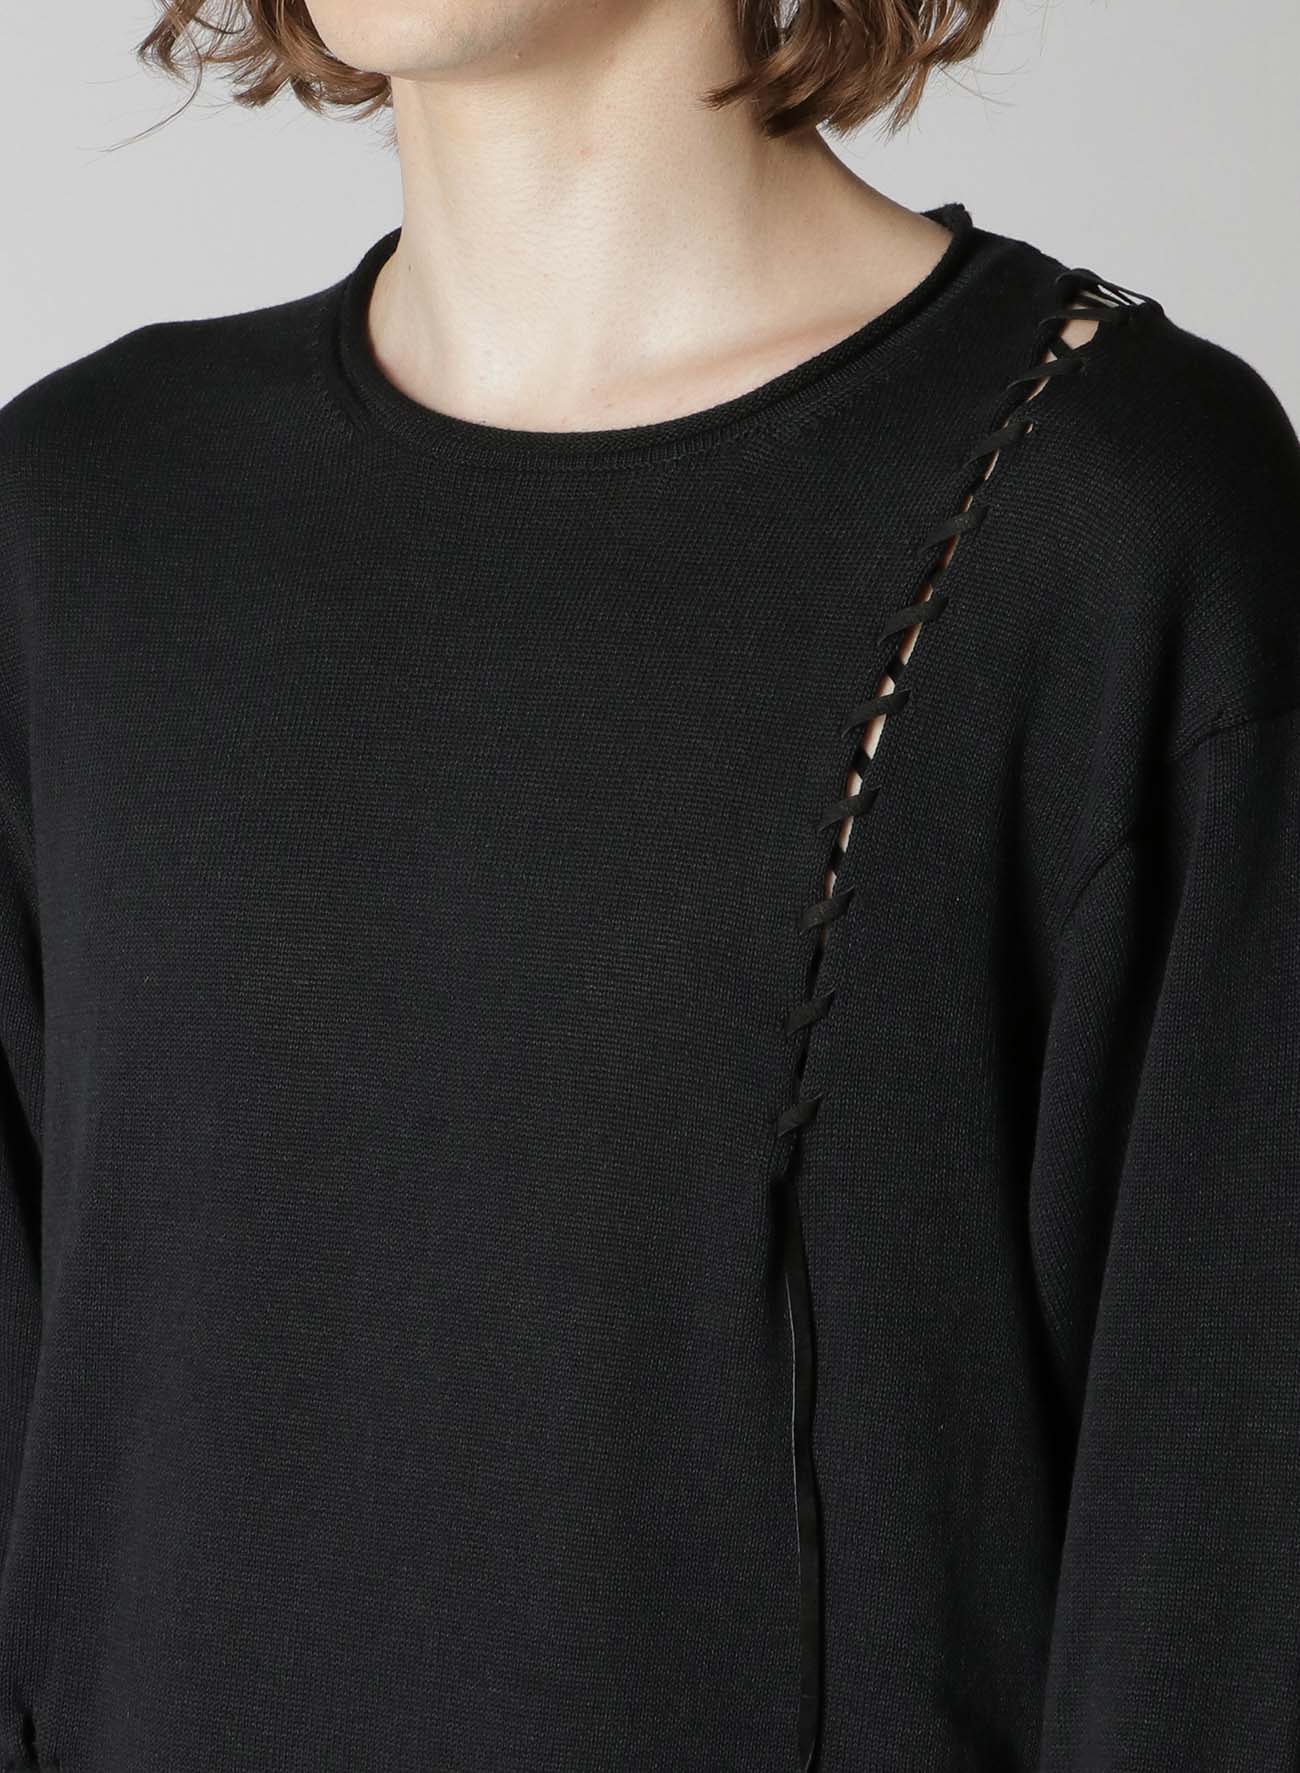 10G KNITTED LONG SLEEVE T-SHIRT WITH LEATHER STRAP DETAILS